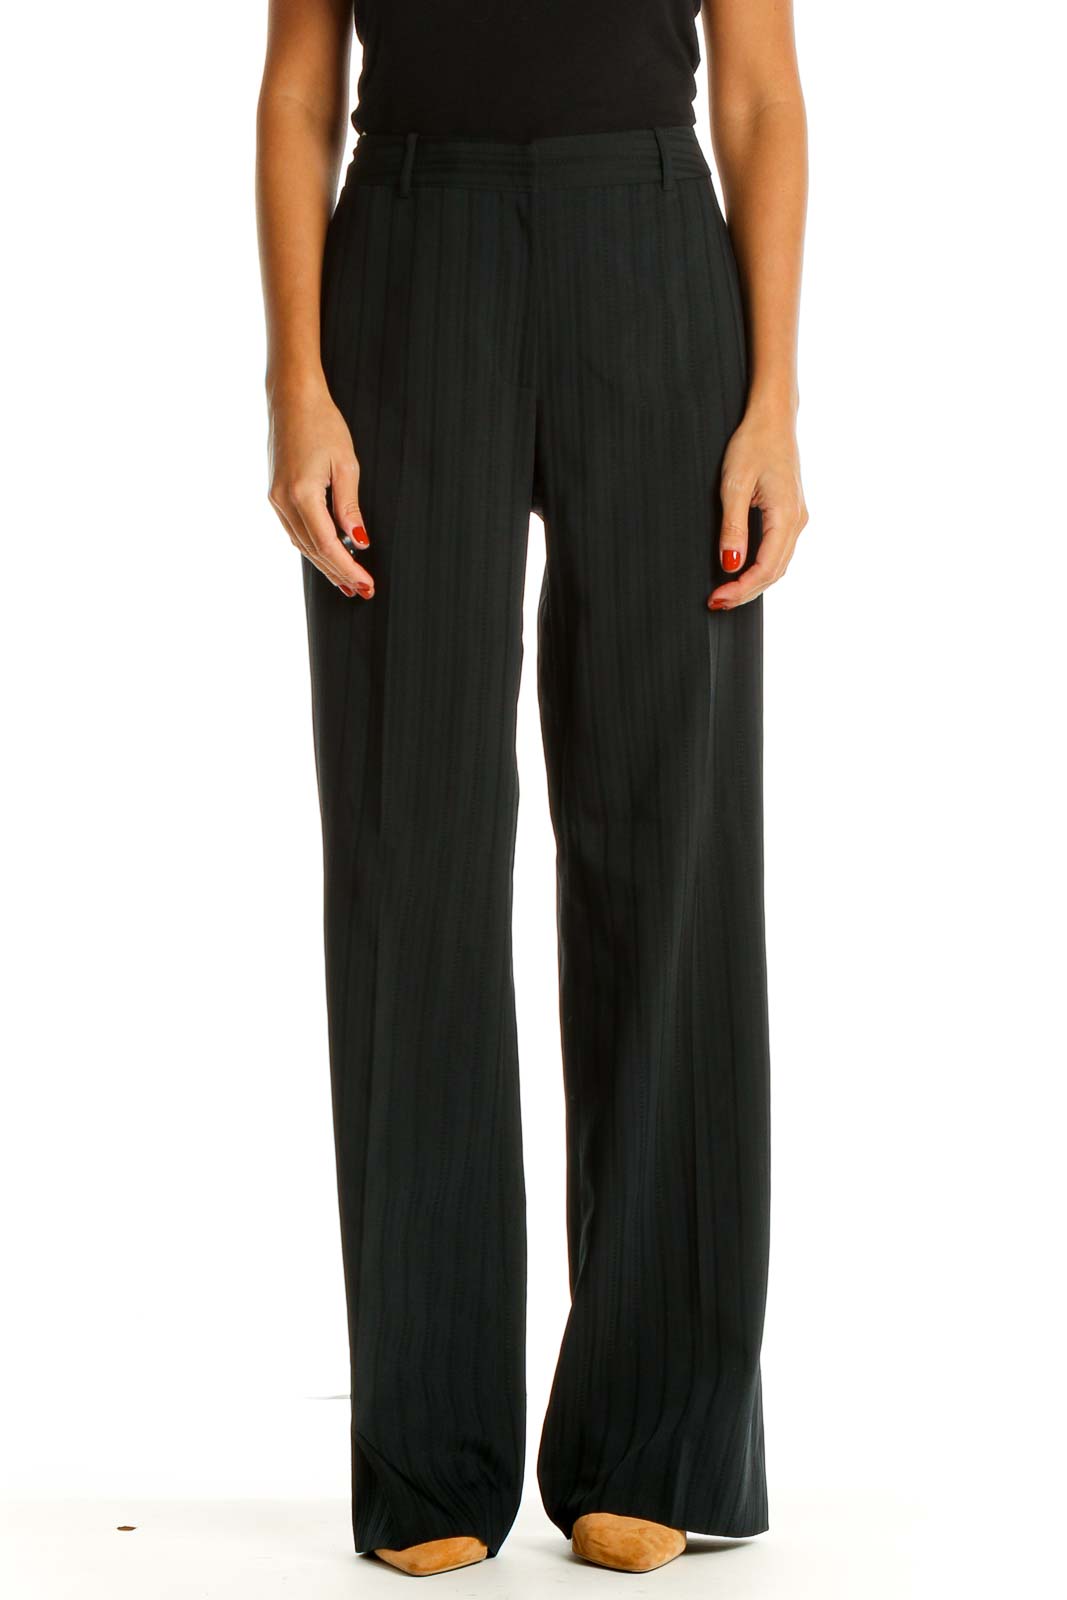 Black Striped Classic Trousers Front